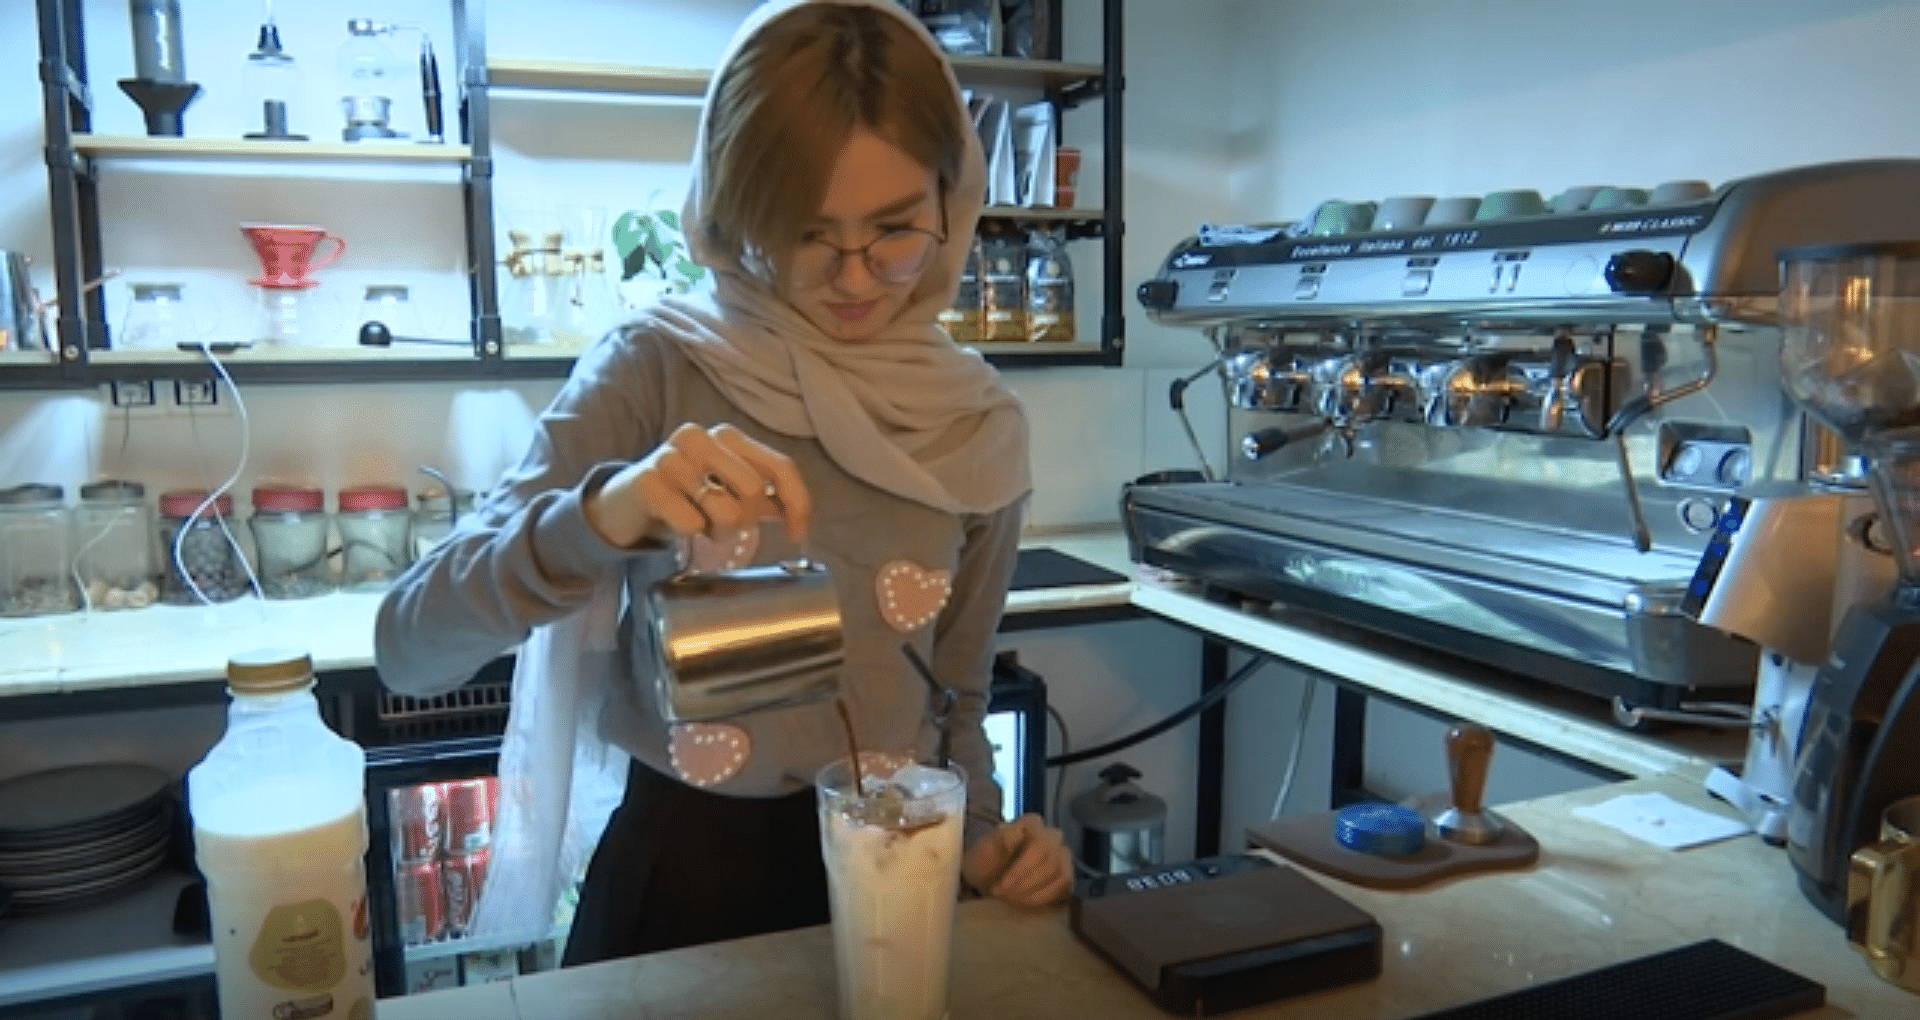 Serving freshly plunged French coffee, this cafe is becoming a local haunt for Afghans and Iranians. It is the brainchild of 21-year-old Afghan refugee Fatemeh Jafari and is the first Afghan cafe in Tehran.